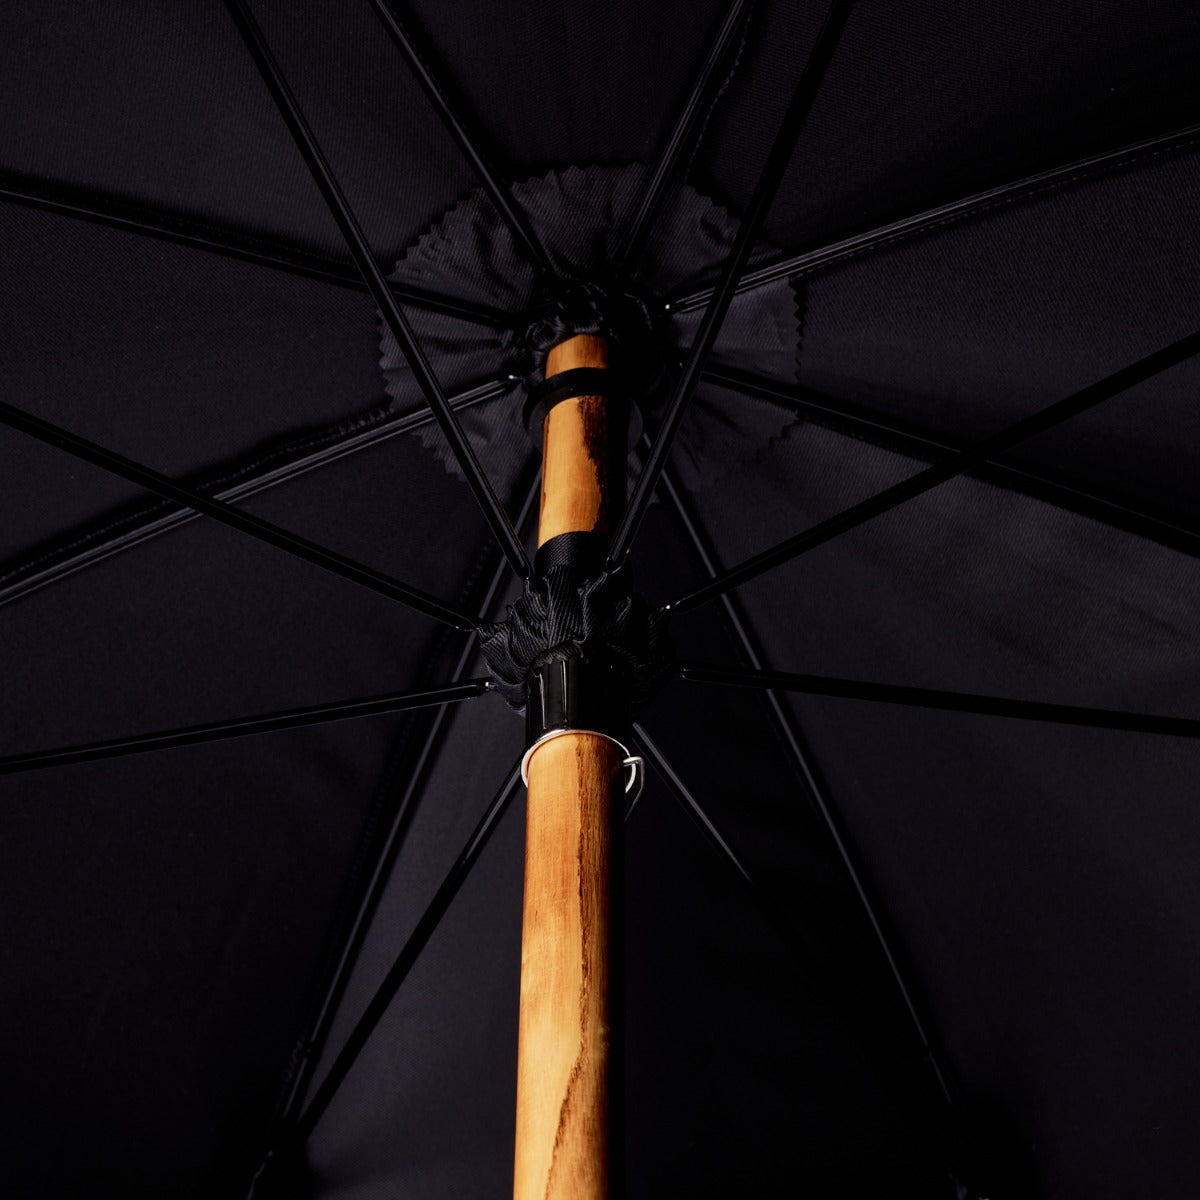 A Palundio Umbrella with Black Twill Canopy handmade by KirbyAllison.com with a wooden handle.